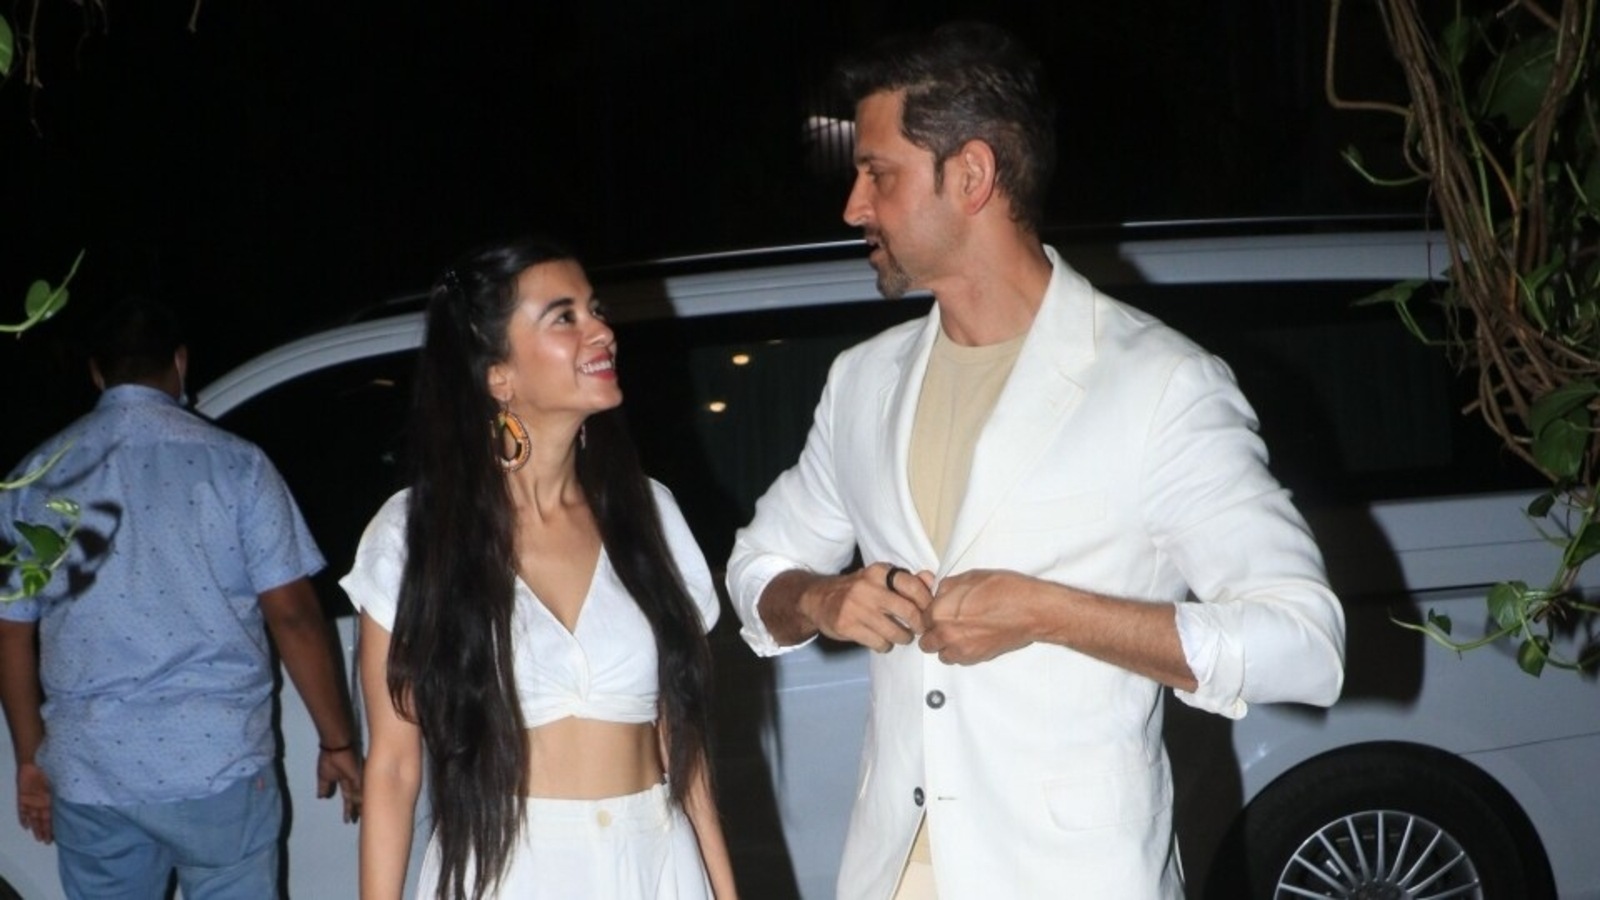 hrithik-roshan-and-saba-azad-twin-in-white-as-they-attend-a-friend-s-wedding-event-in-mumbai-see-pics-and-video